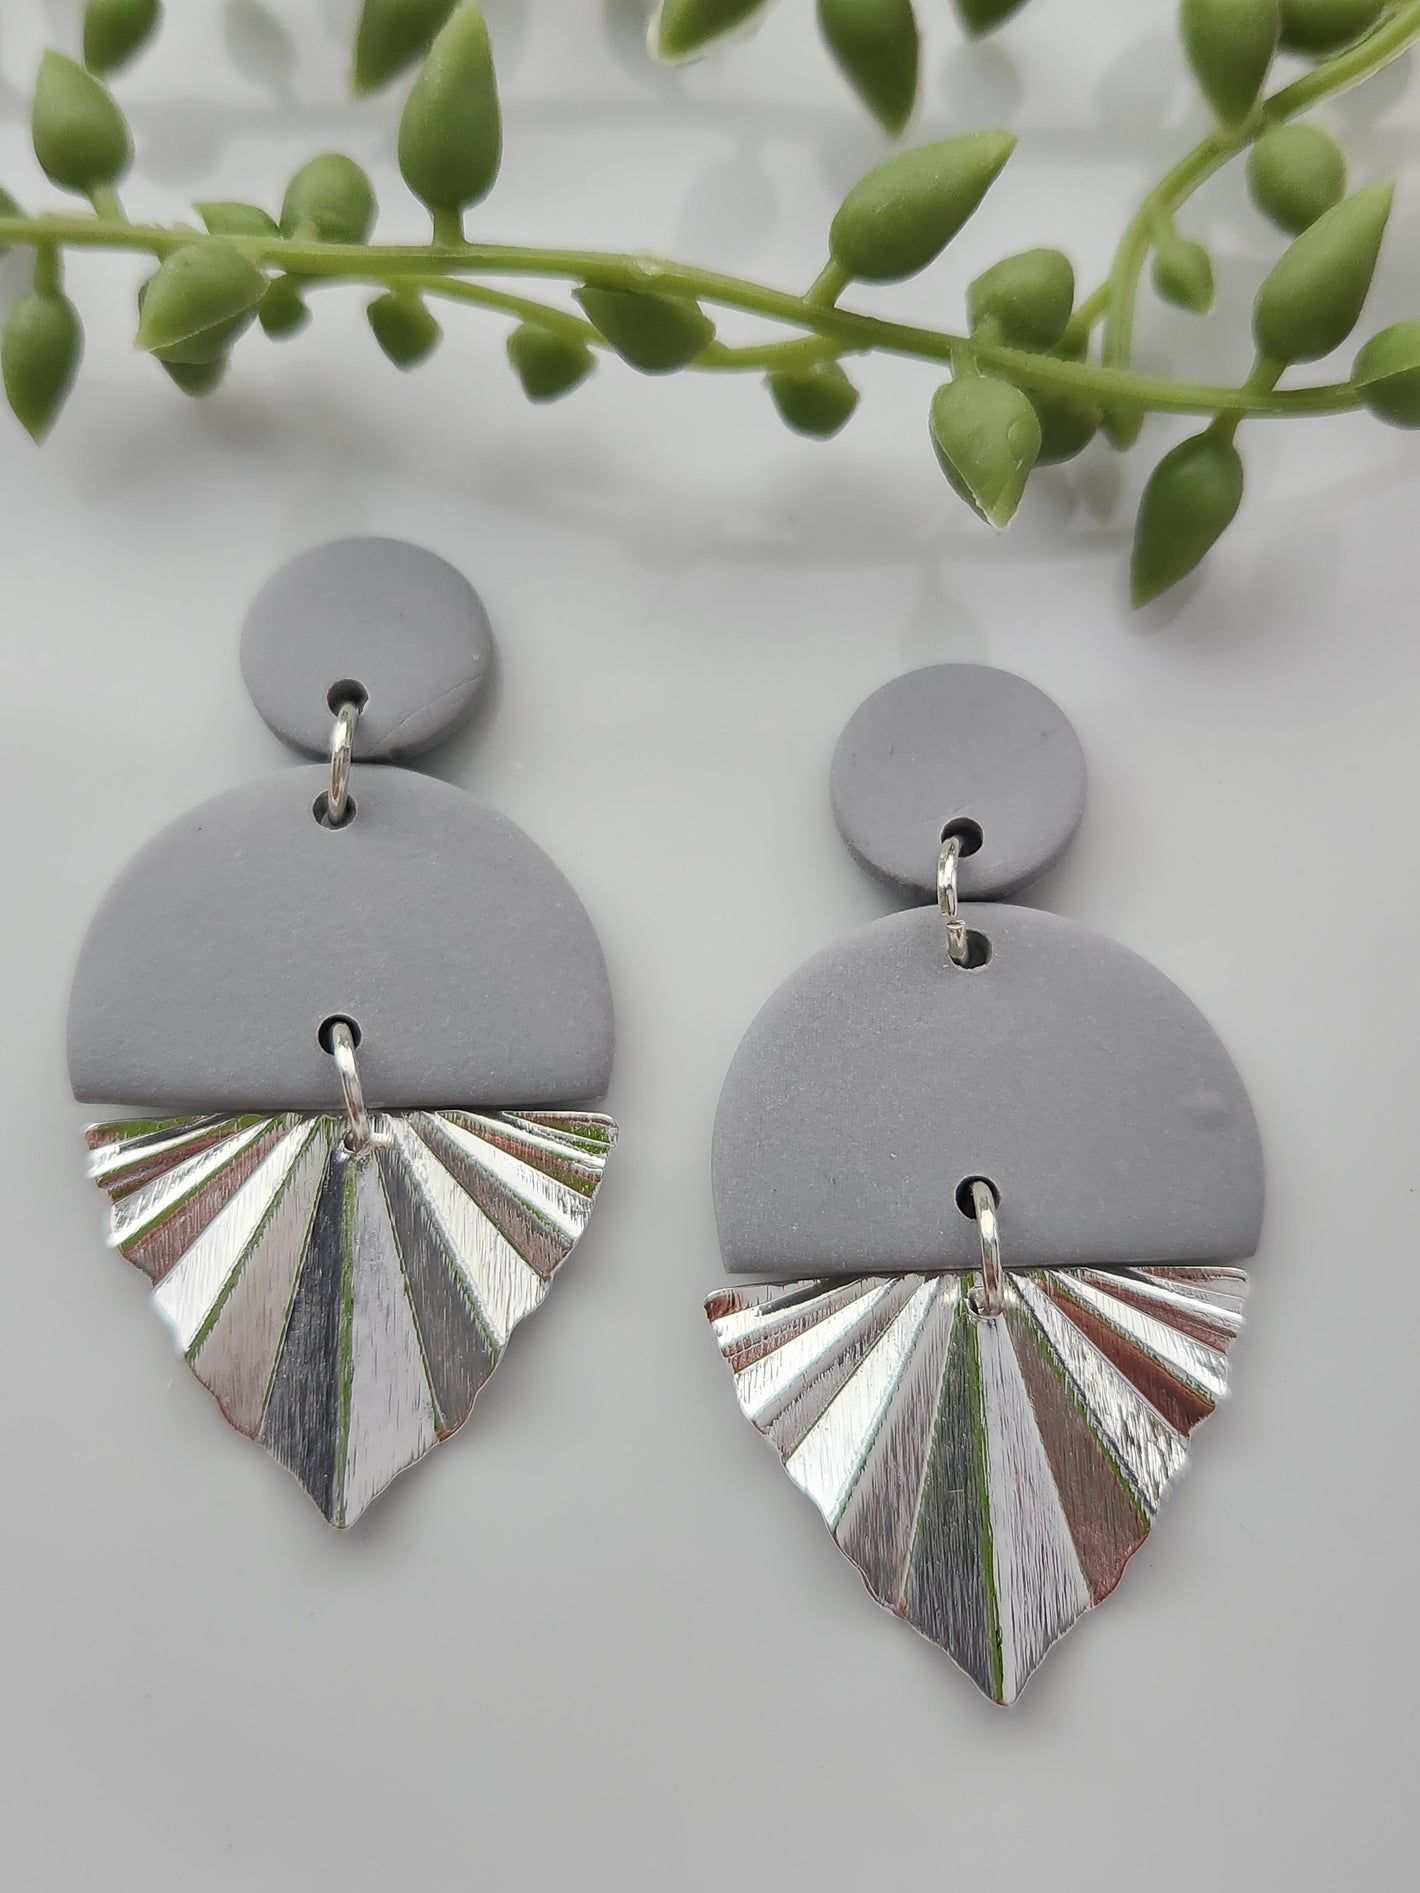 Handmade polymer clay earrings! Love this grey clay color! These earrings are designed with a circle stud, a cut-off large circle, and a shiny silver-plated triangle charm. They are sure to make any outfit stand out! Lightweight, matte, and approximately 2" long.